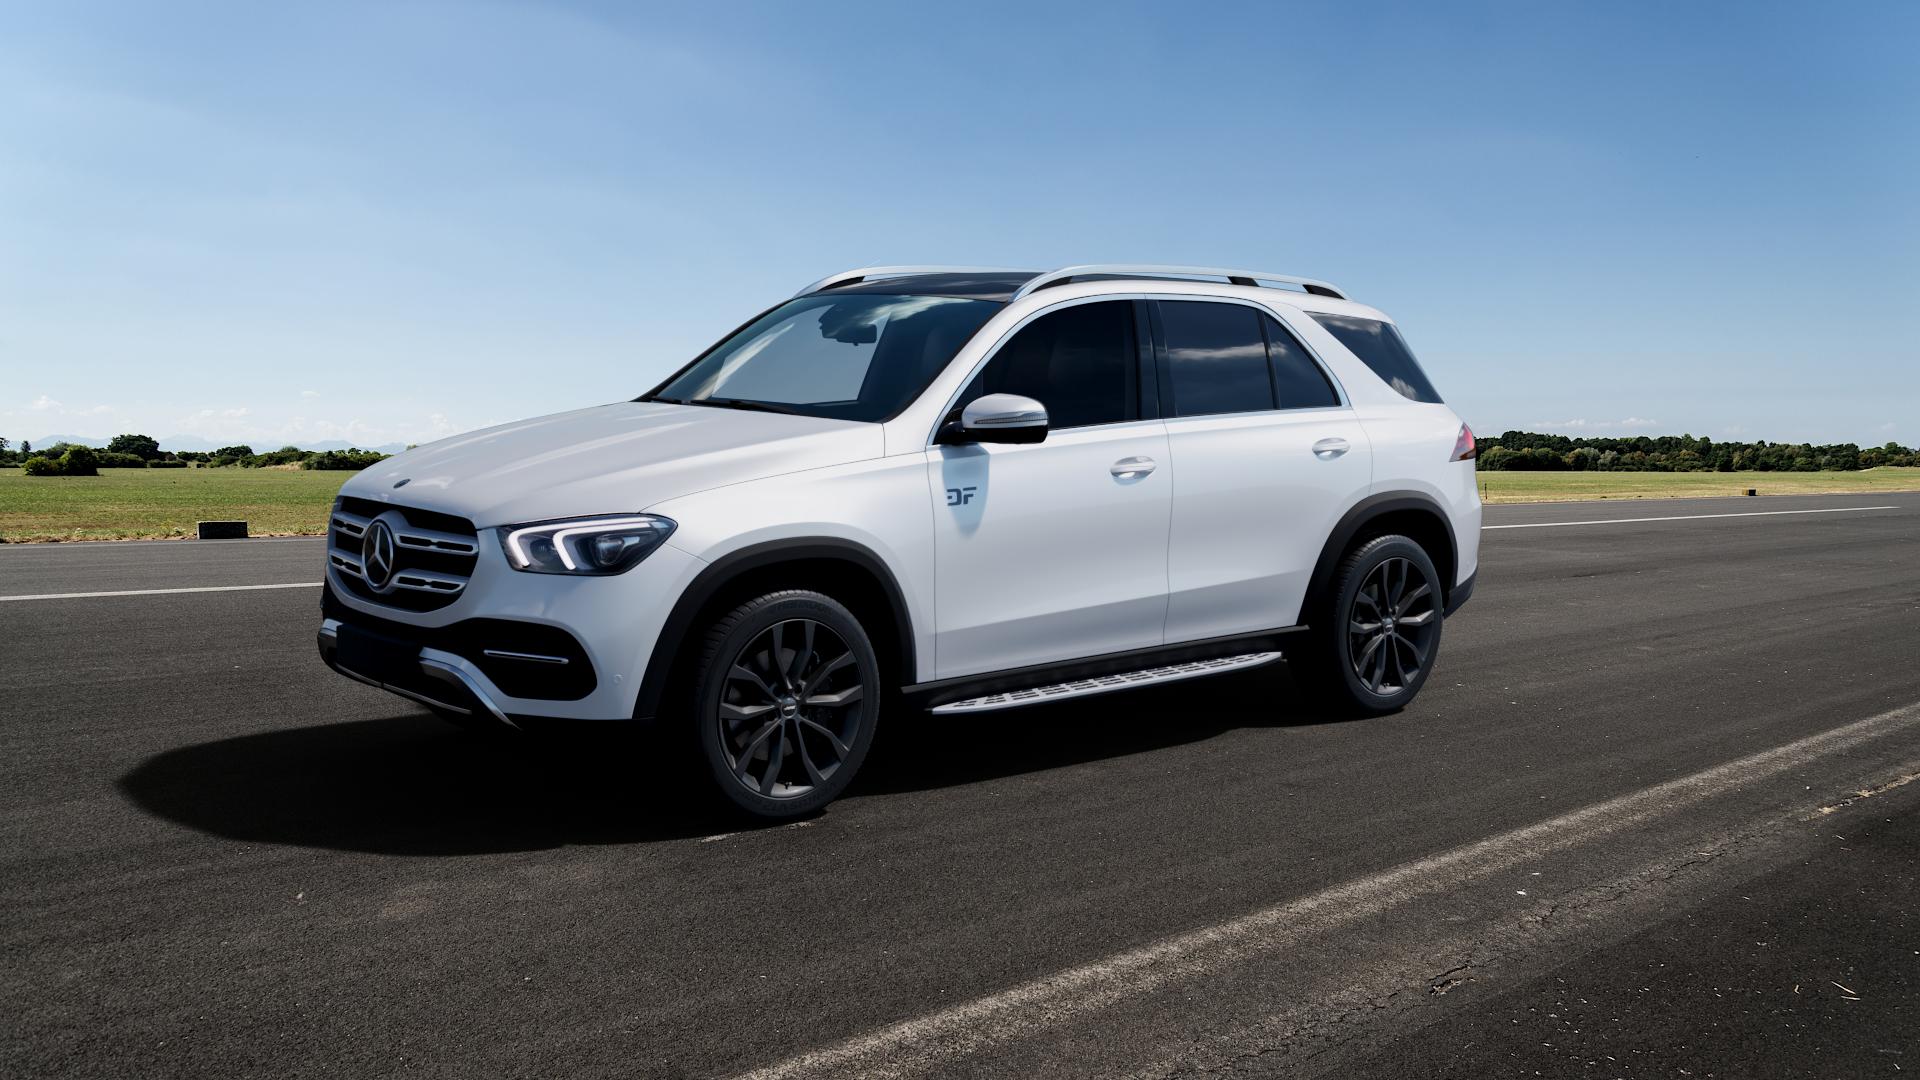 Mercedes GLE-Class SUV Type V167 (H1GLE) 2,9l GLE 400 d 4Matic 243kW (330  hp) Wheels and Tyre Packages | velonity.com